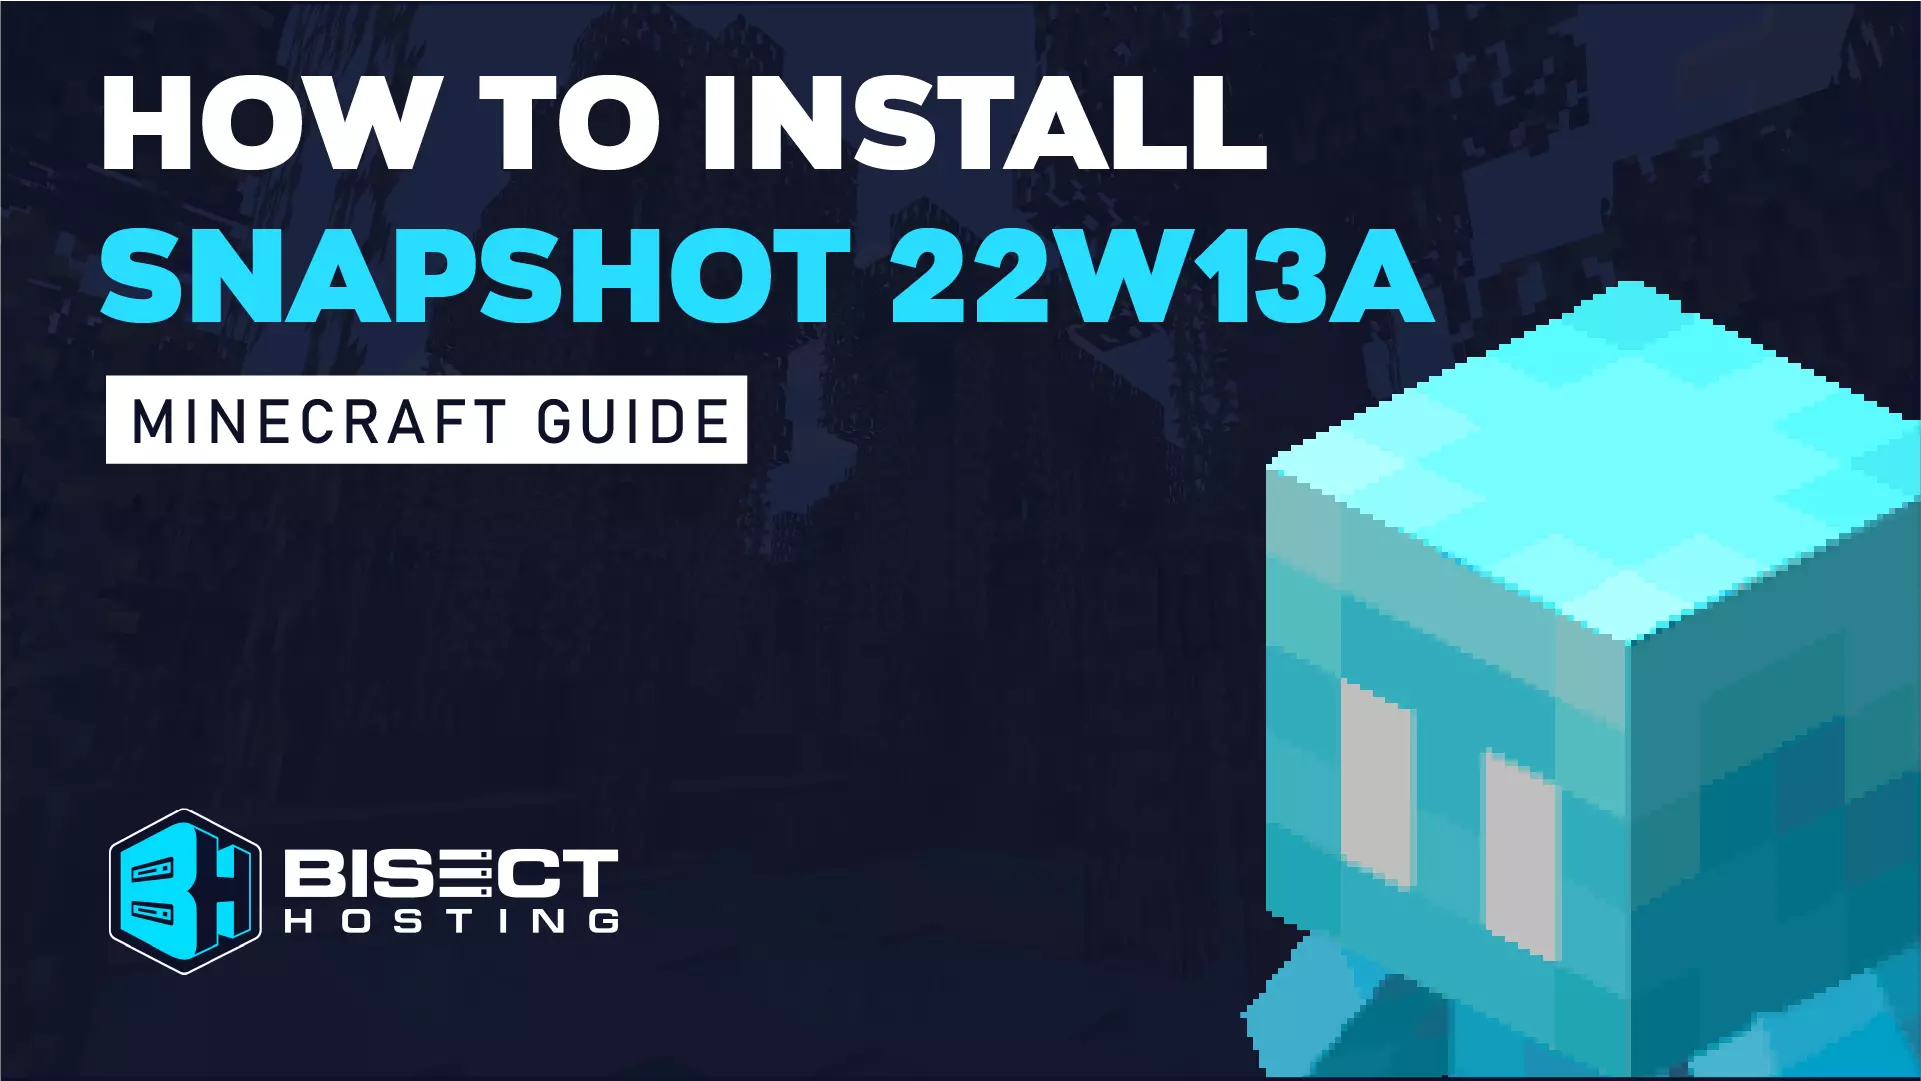 How to Install Minecraft Snapshot 22w13a